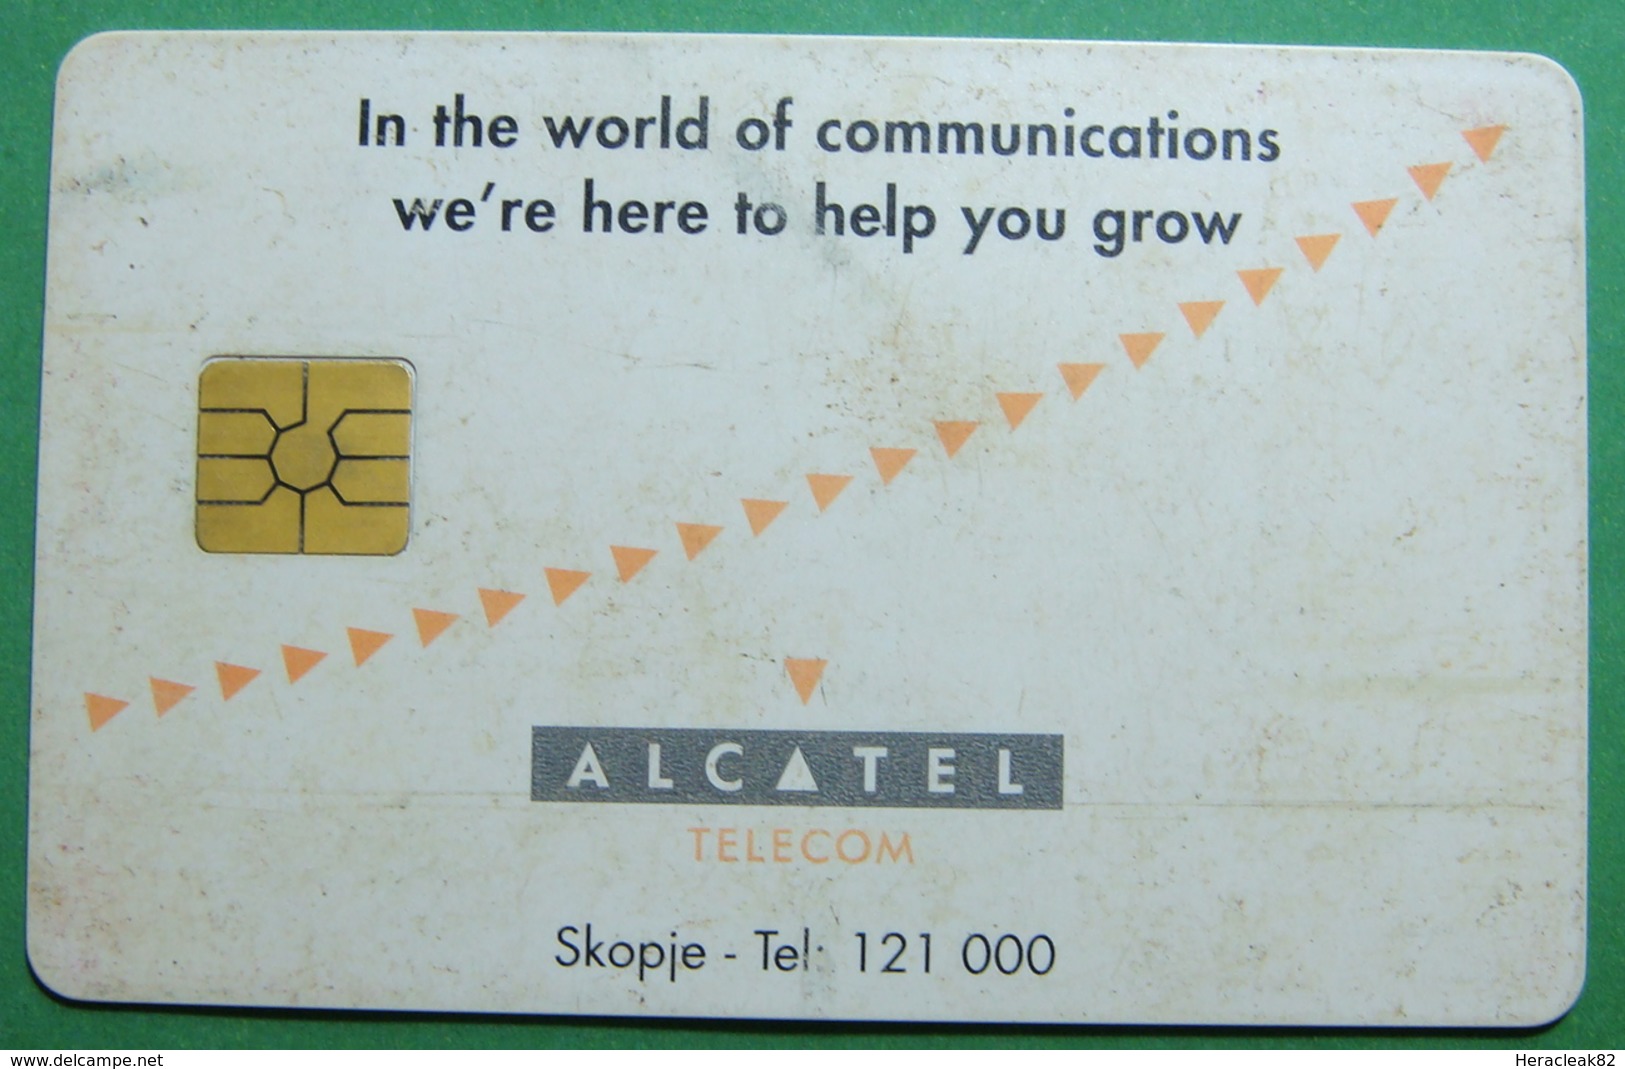 Macedonia CHIP PHONE CARD USED, Operator: Mobimak, Without Value *ALCATEL* RARE - Macédoine Du Nord